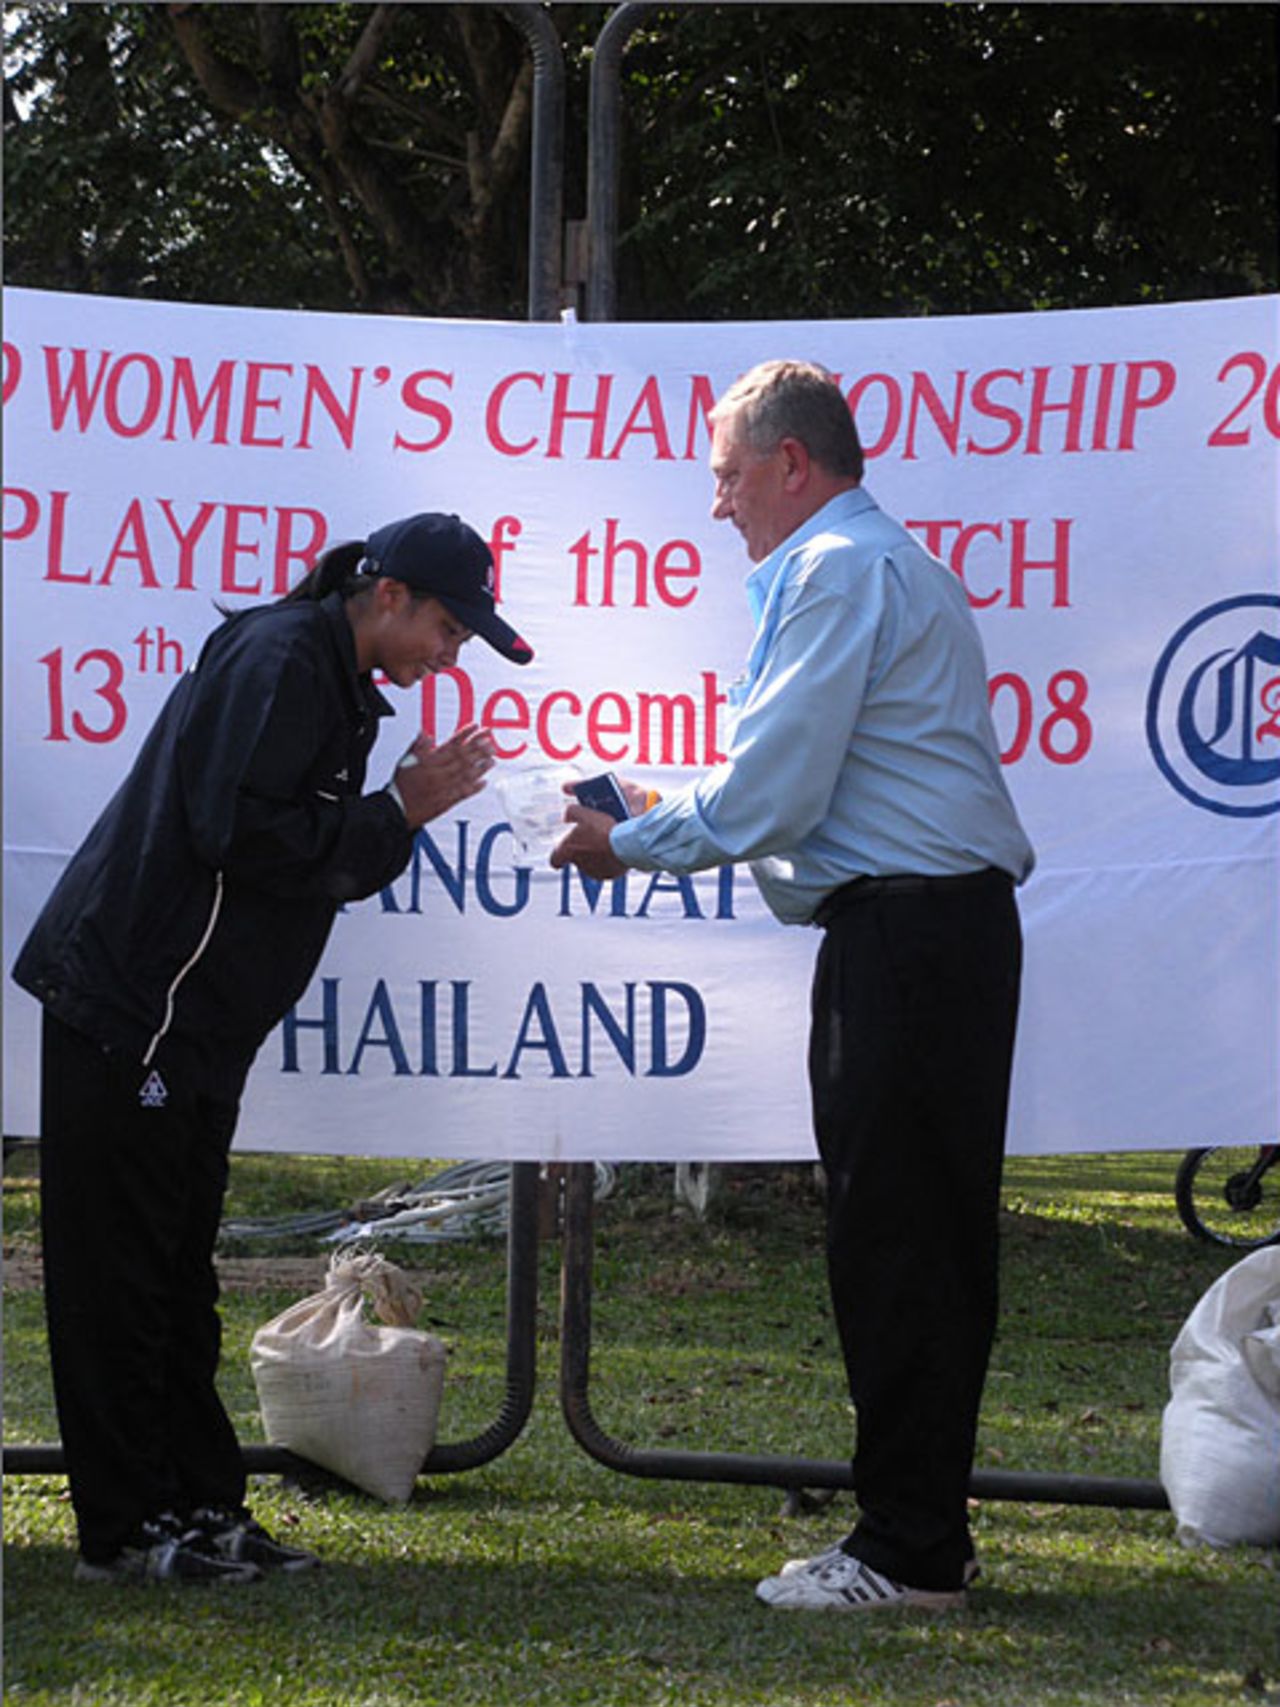 Siwaporn Kosathong accepts the Player-of-the-Match trophy for her unbeaten 33, Thailand v Qatar, Chiang Mai Gymkahan, ACC U-19 women's tournament, Thailand, December 13, 2008